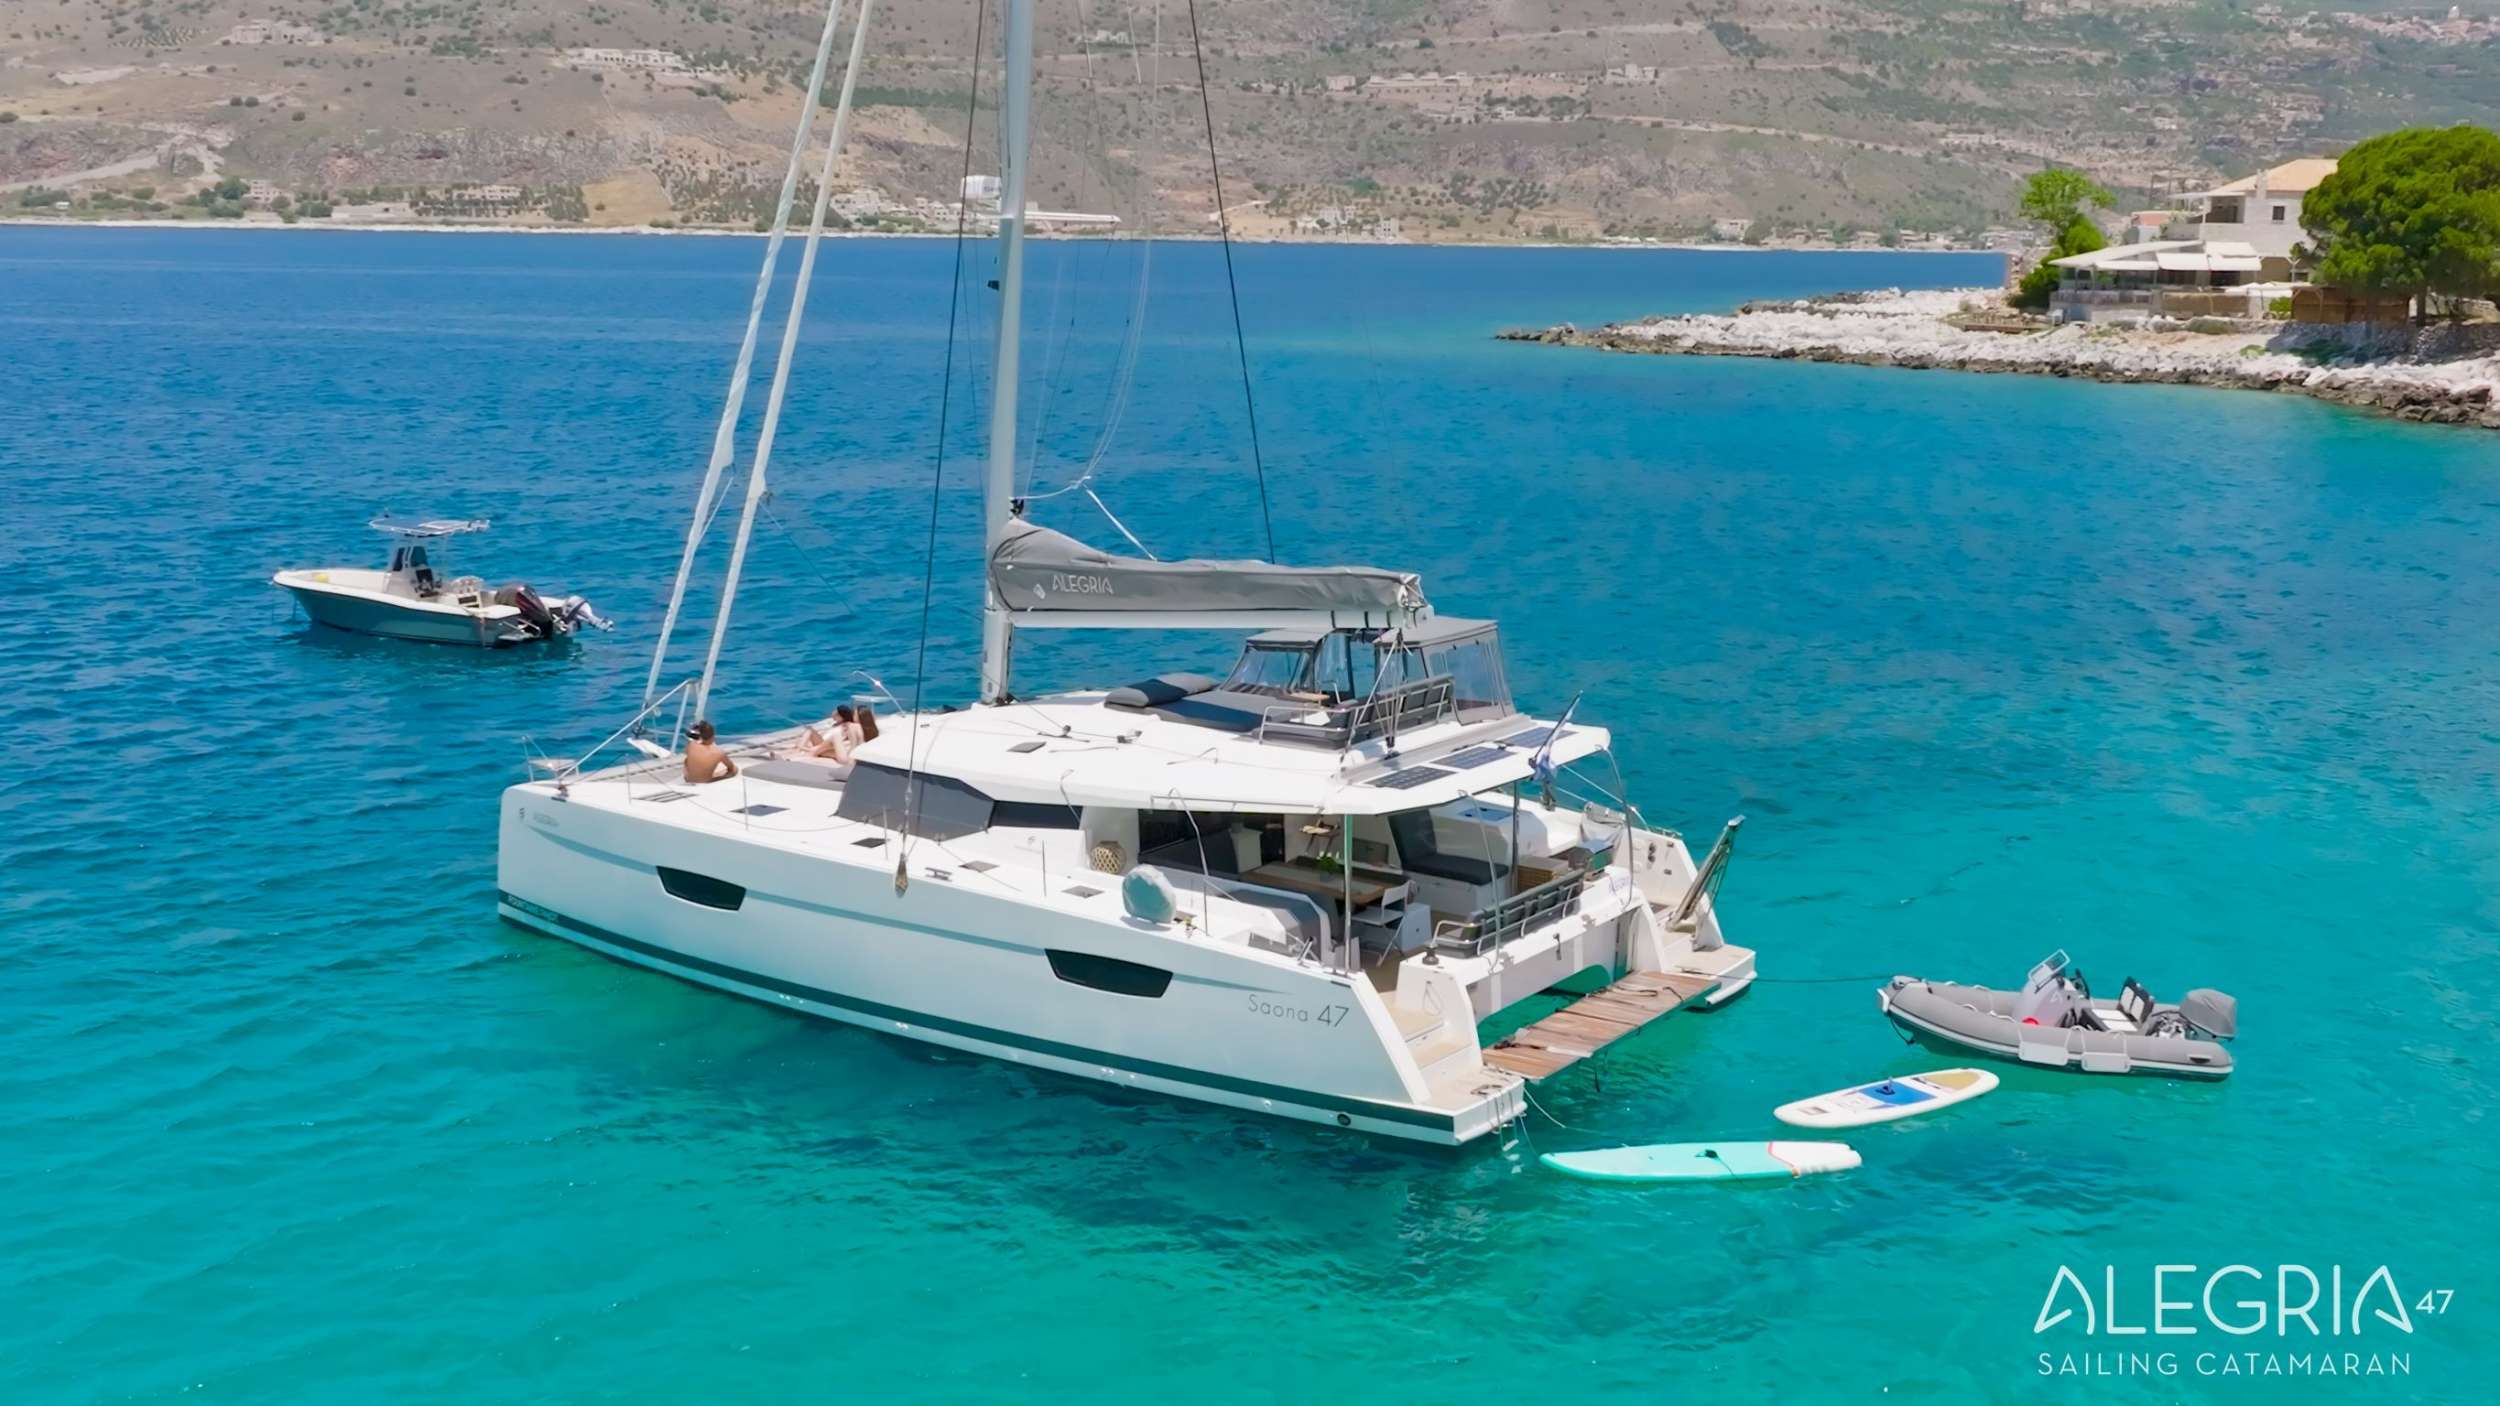 ALEGRIA - Yacht Charter Naxos & Boat hire in Greece 2